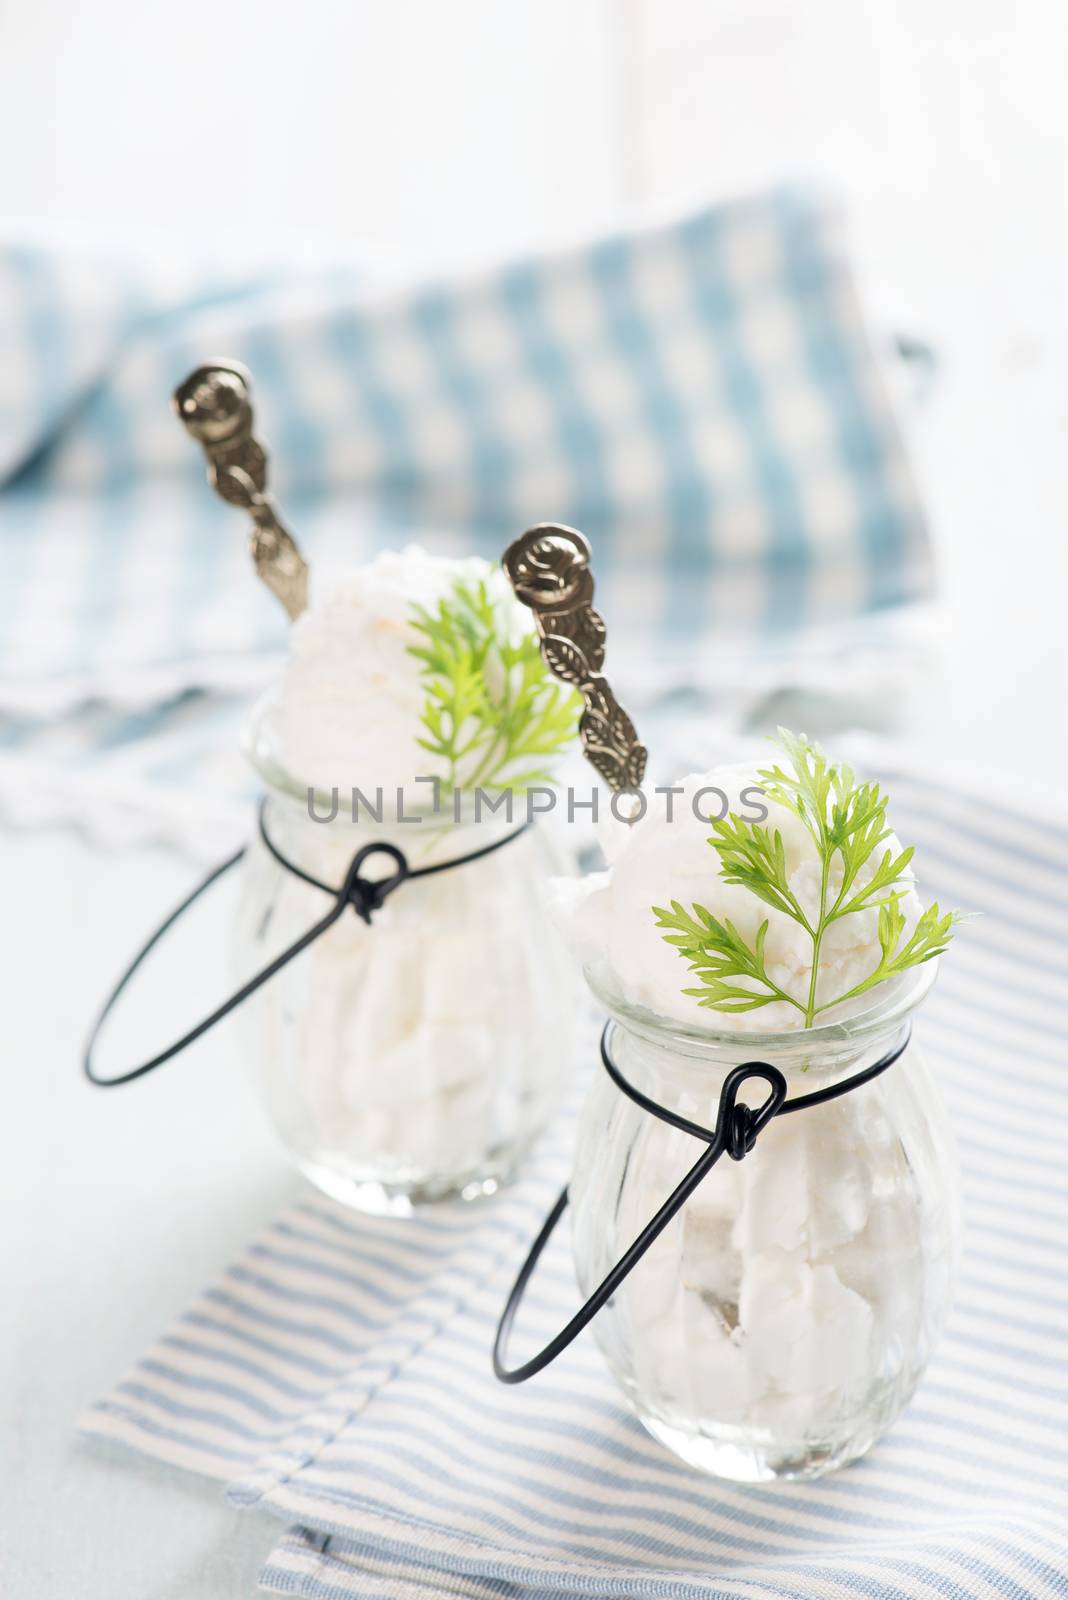 Yoghurt ice cream in cup on white rustic wooden background.